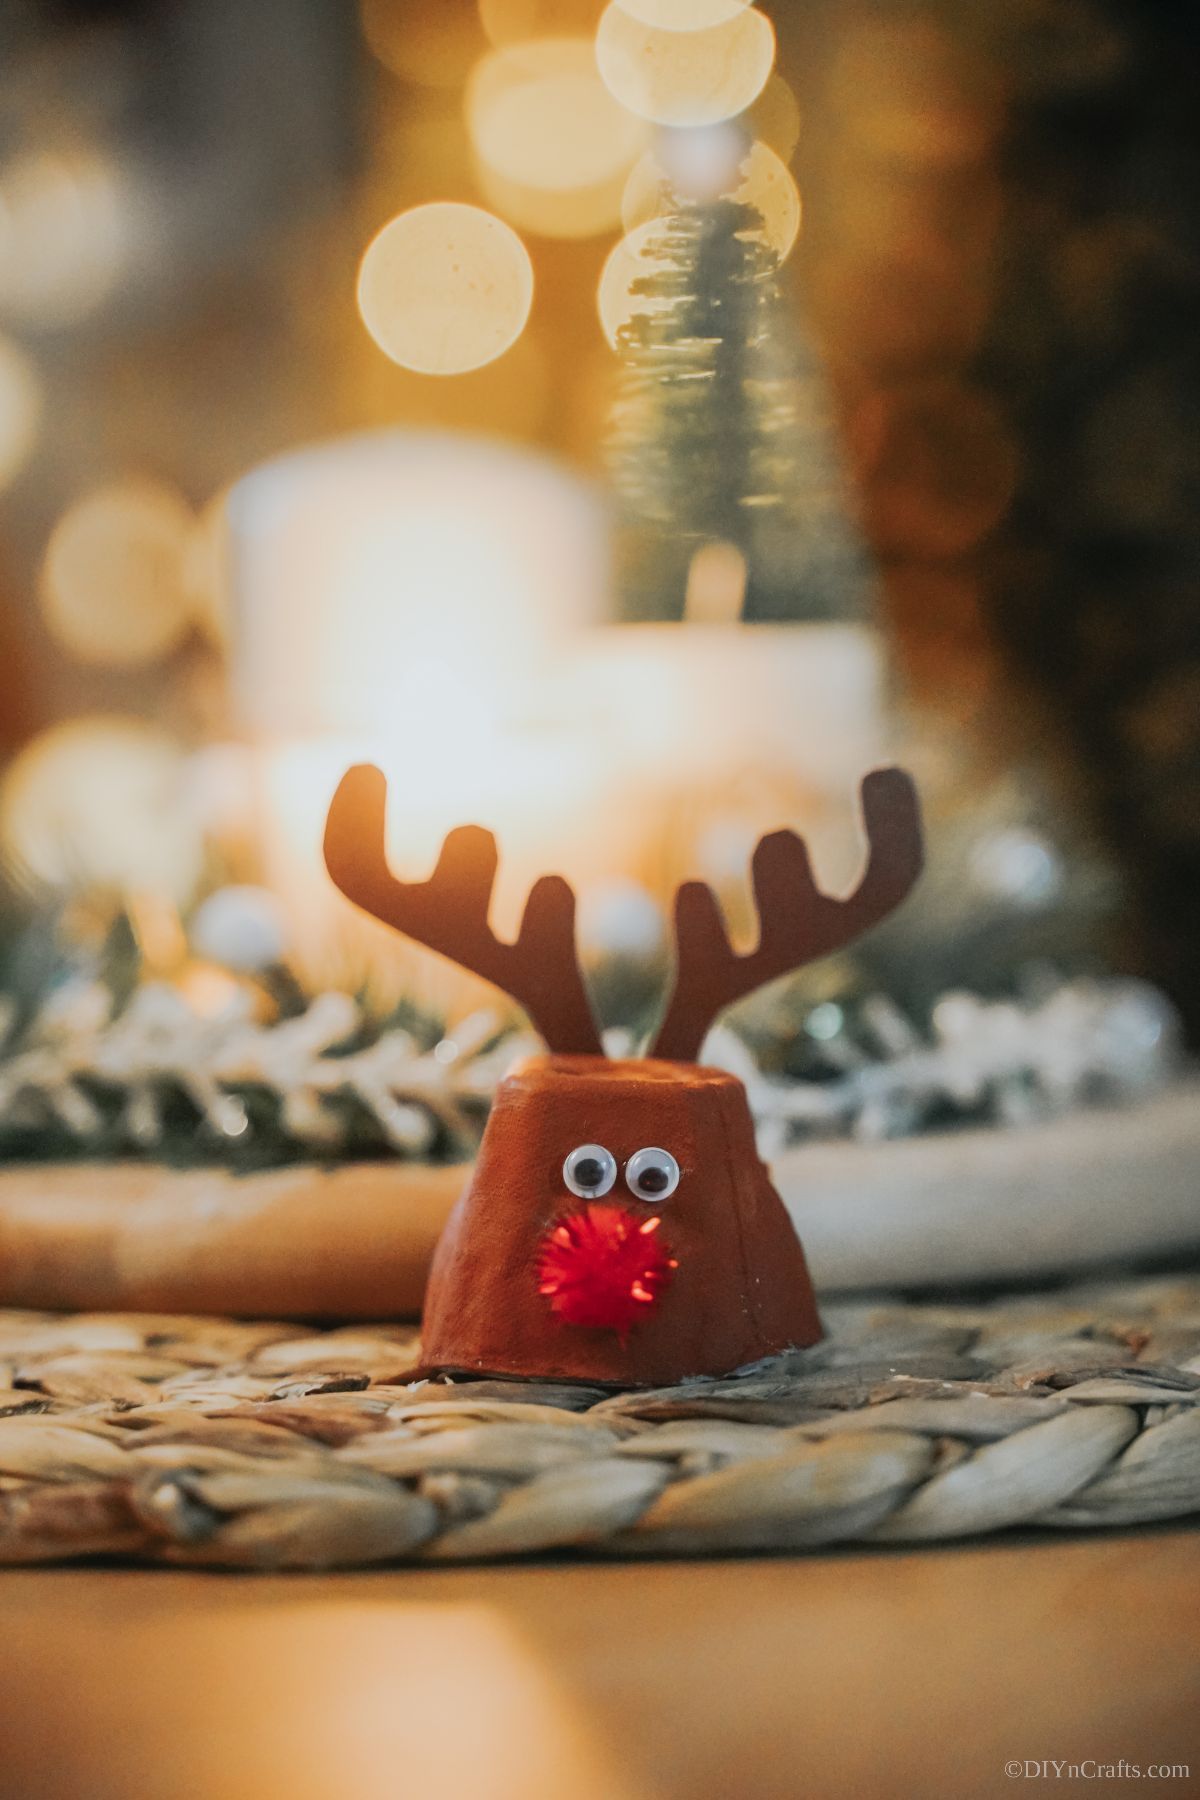 rudolph reindeer made of egg carton cup on table by candle